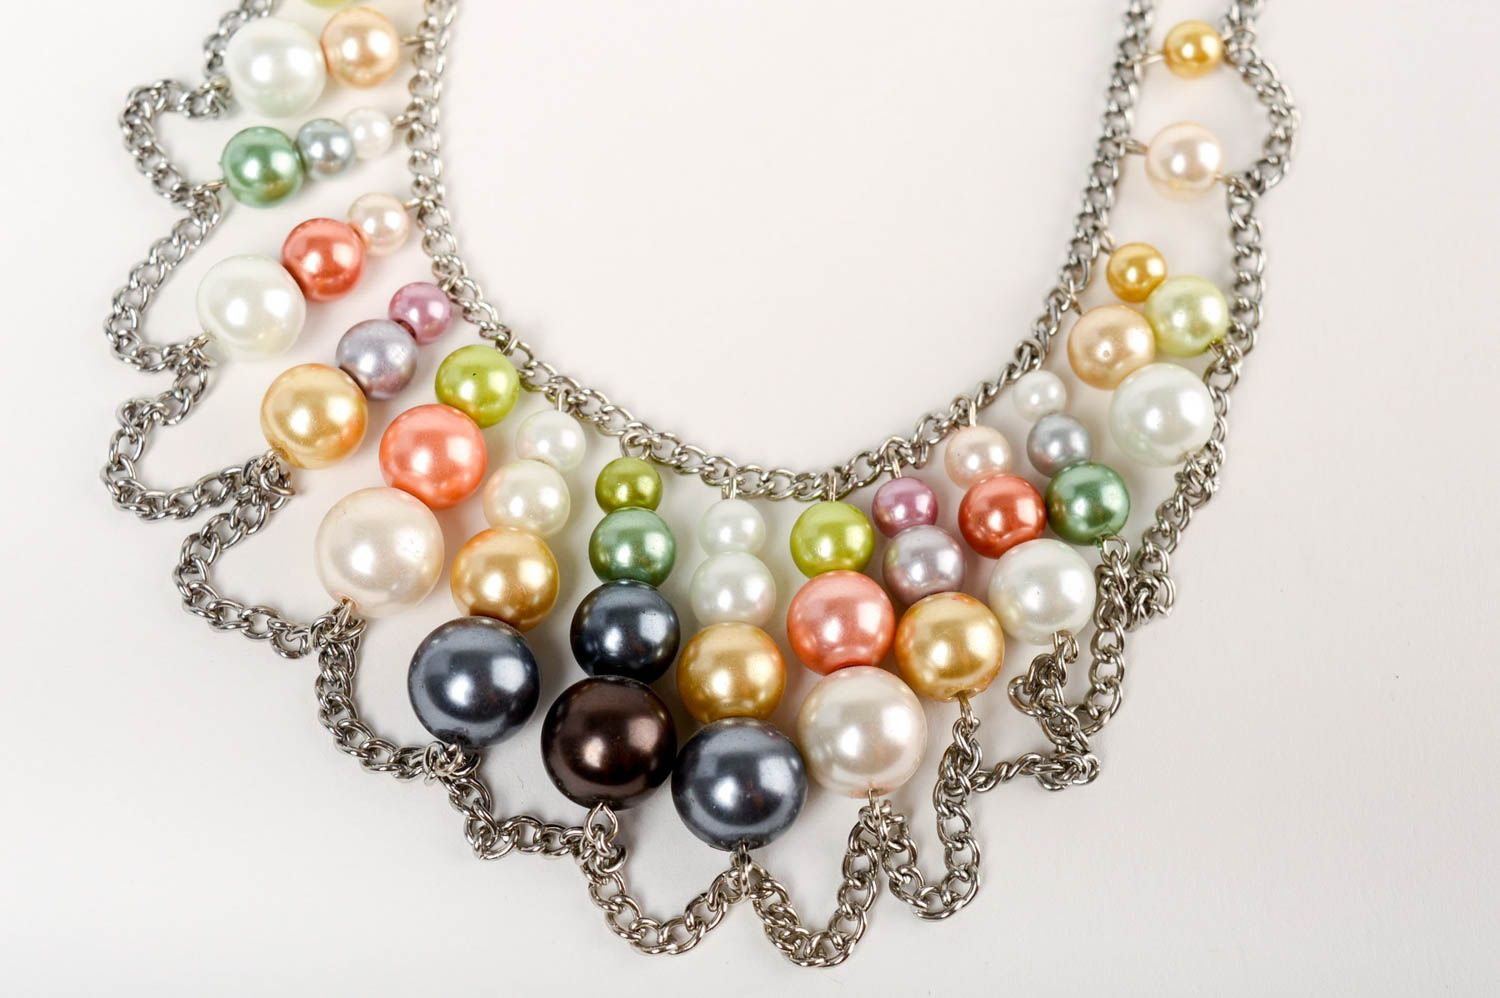 Handmade massive women's necklace with ceramic colorful pearls on metal chain photo 5